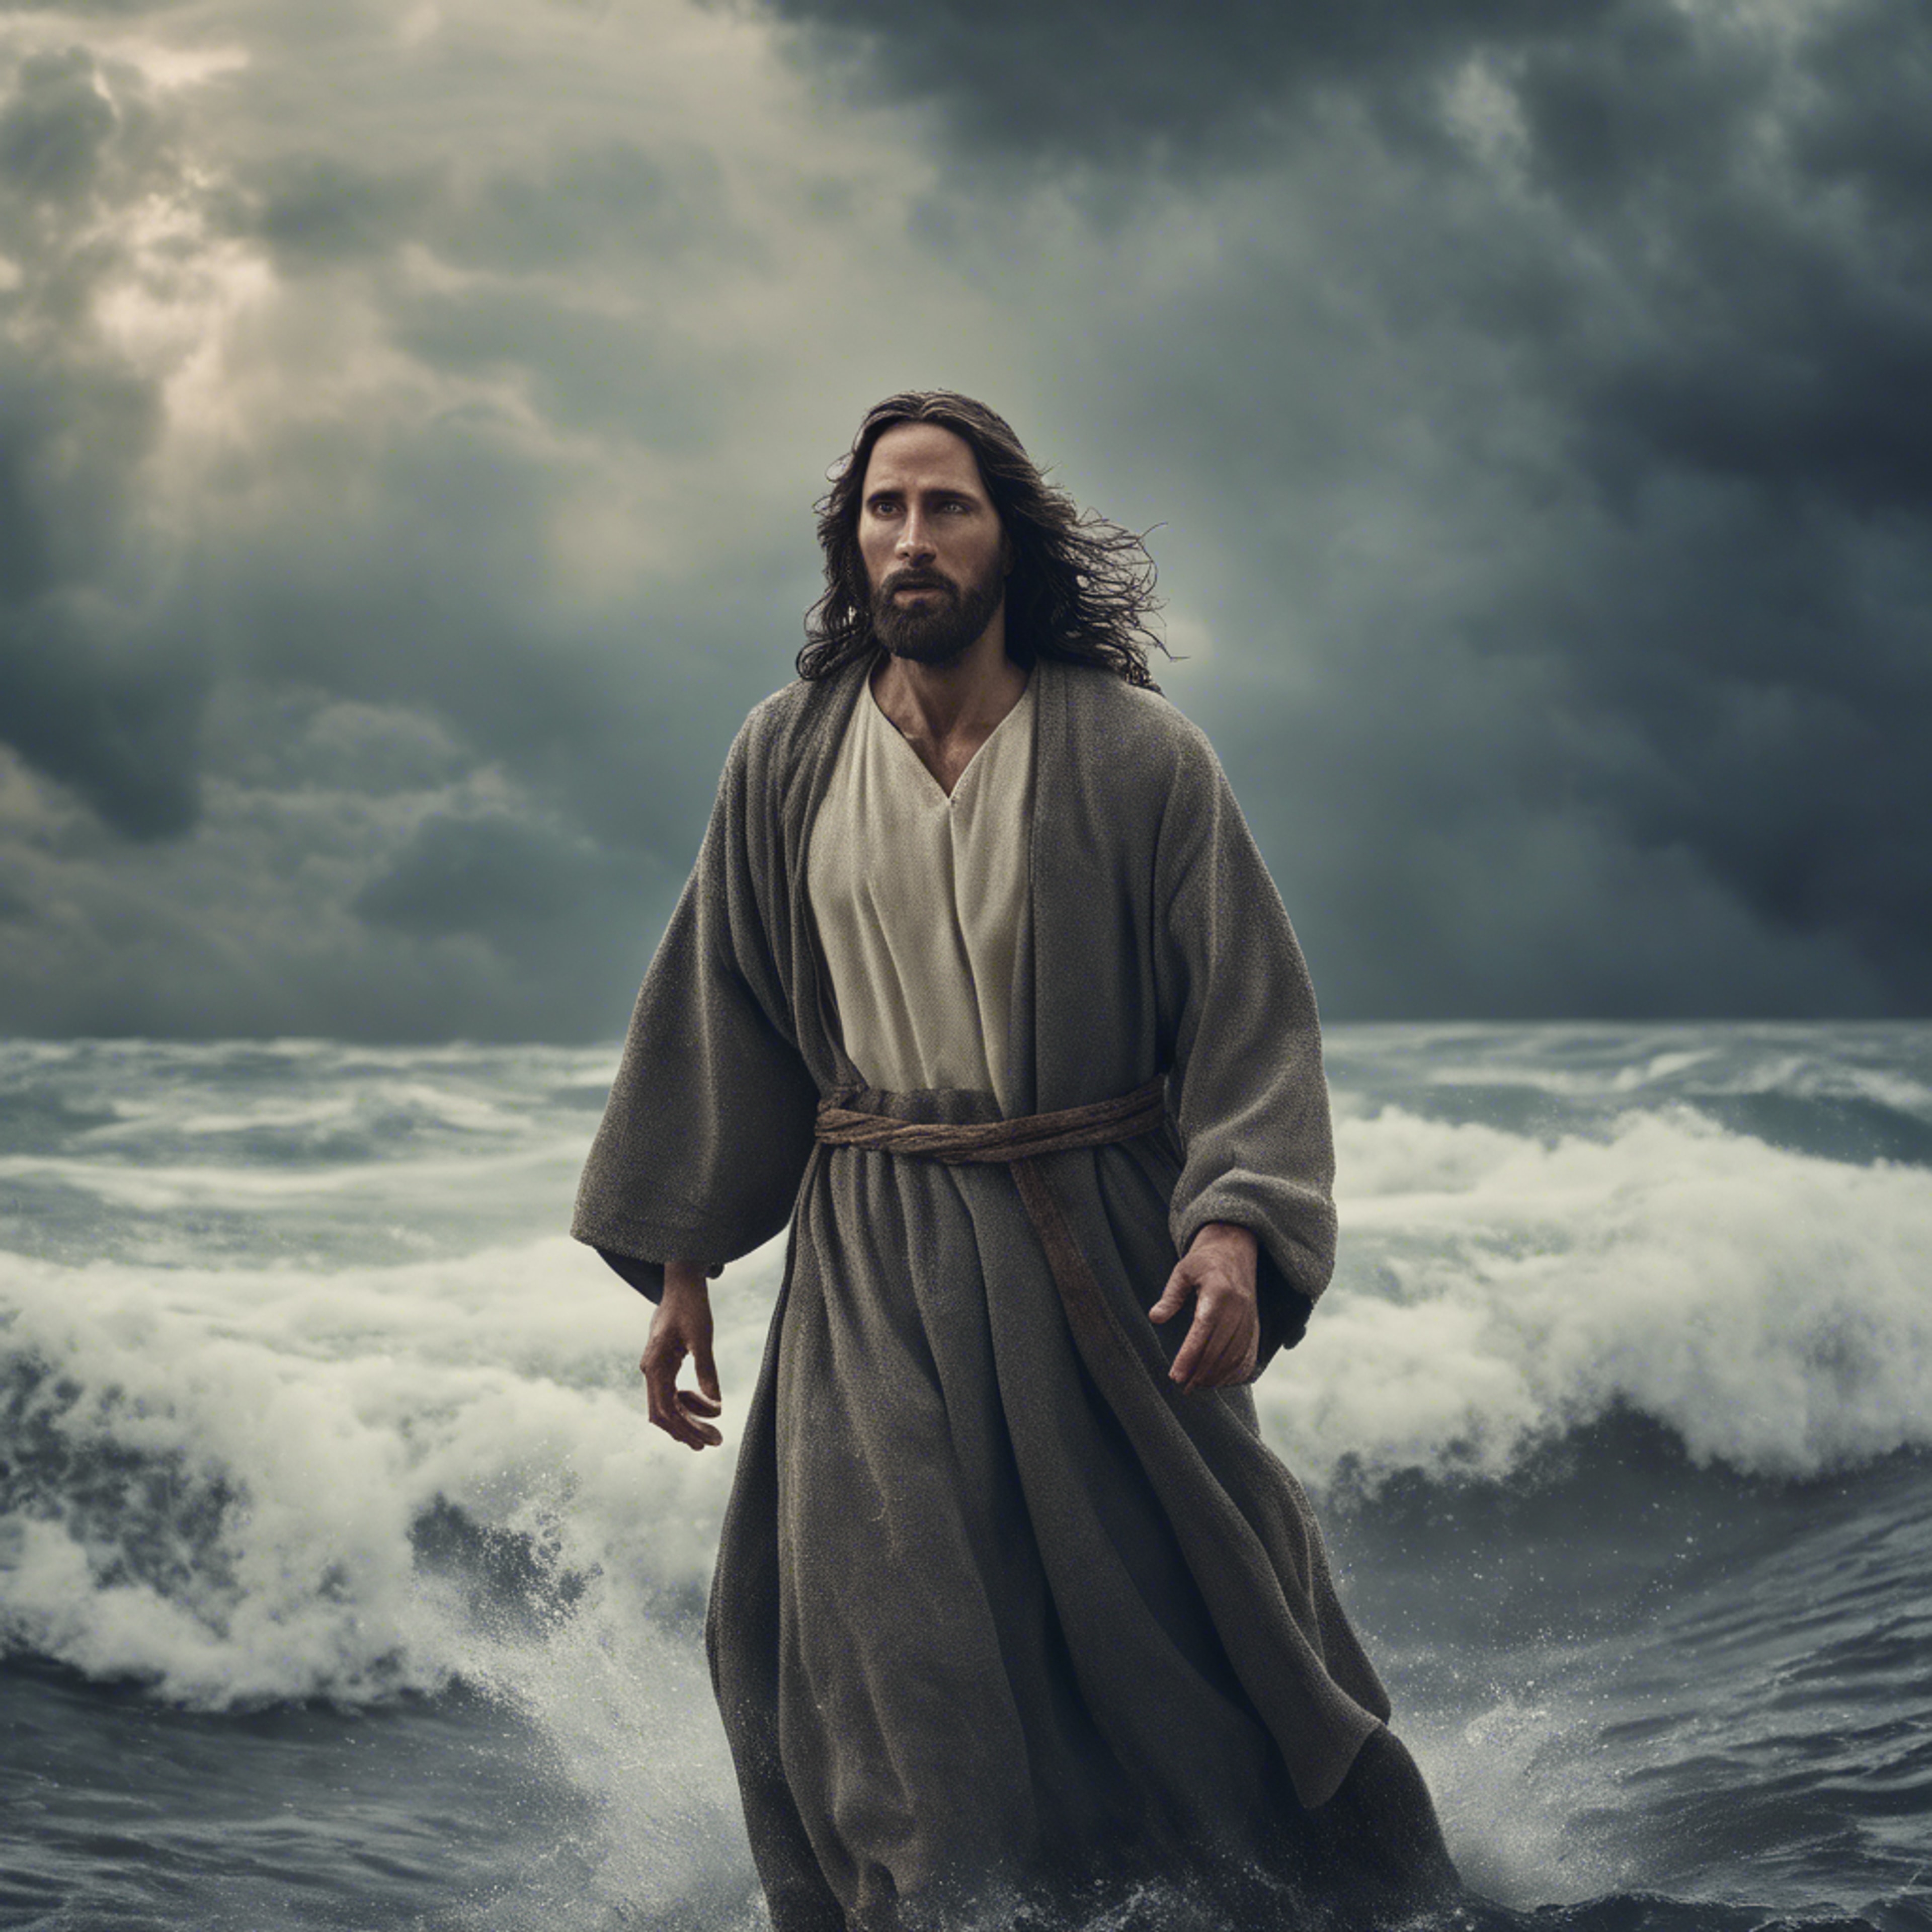 Jesus Christ calmly walking across a stormy sea under a dramatic, cloudy sky. Tapet[40d9c306725247569090]